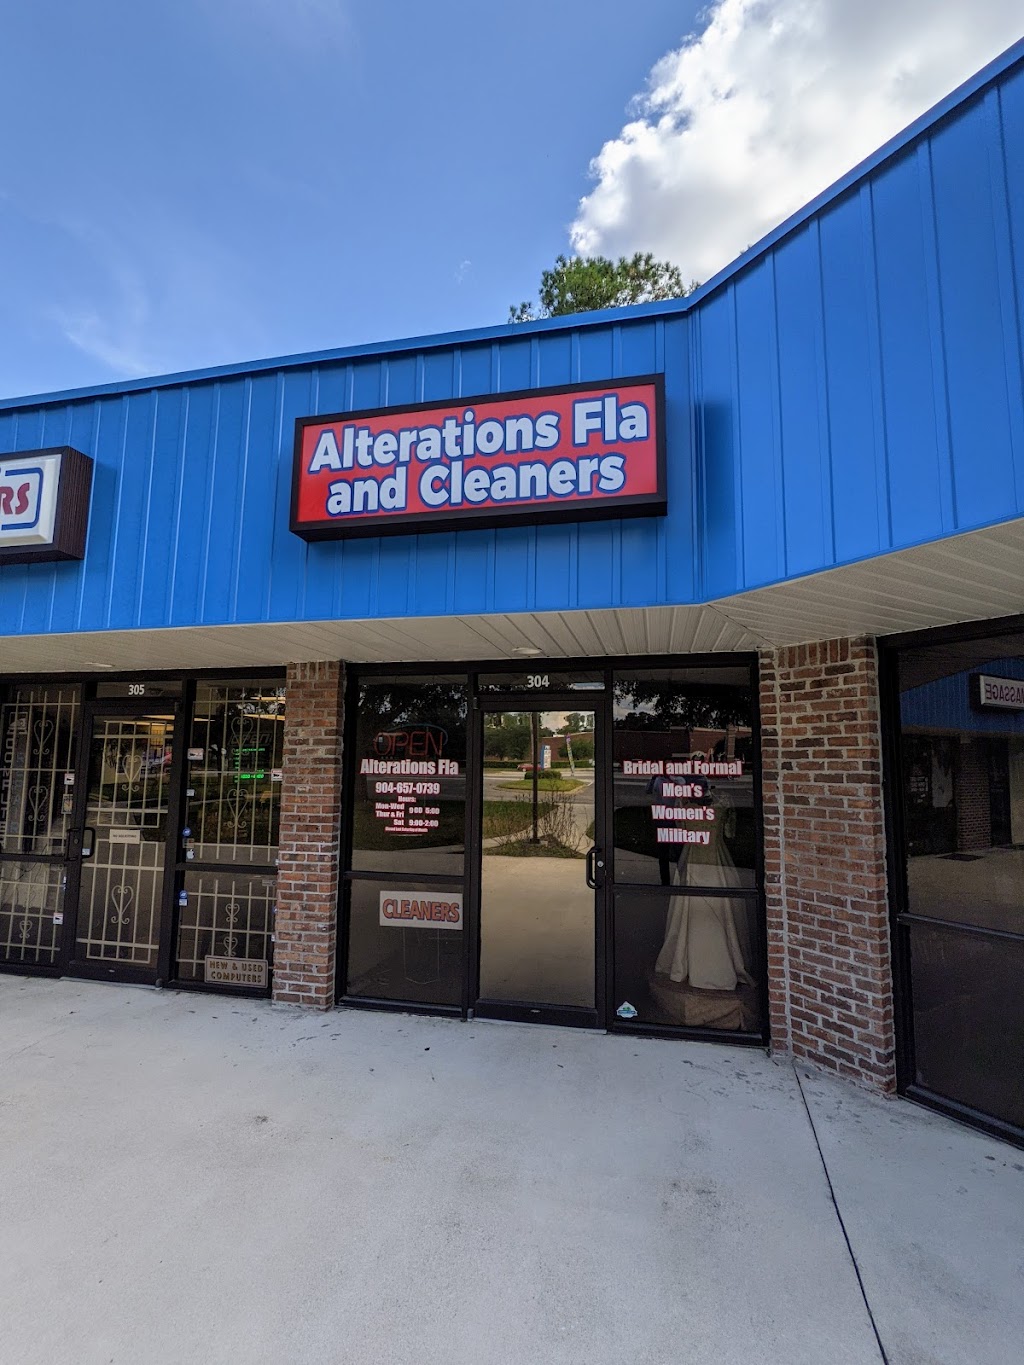 Alterations Fla | 2561 County Rd 220 #304, Middleburg, FL 32068 | Phone: (904) 657-0739